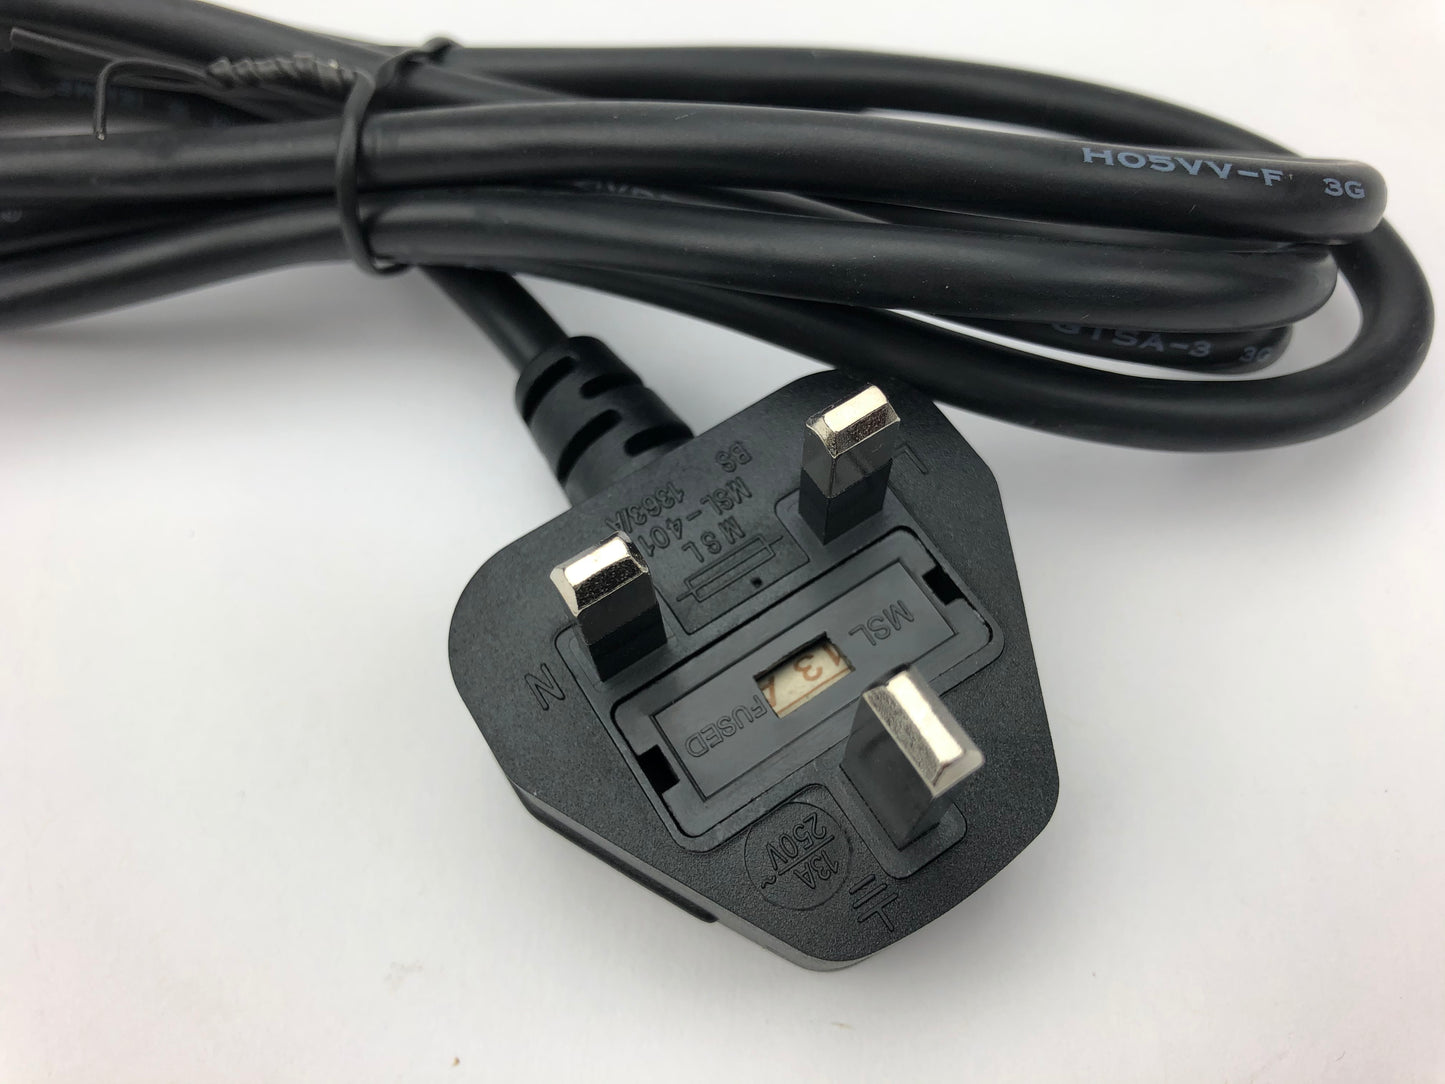 Replacement/International Power Cords